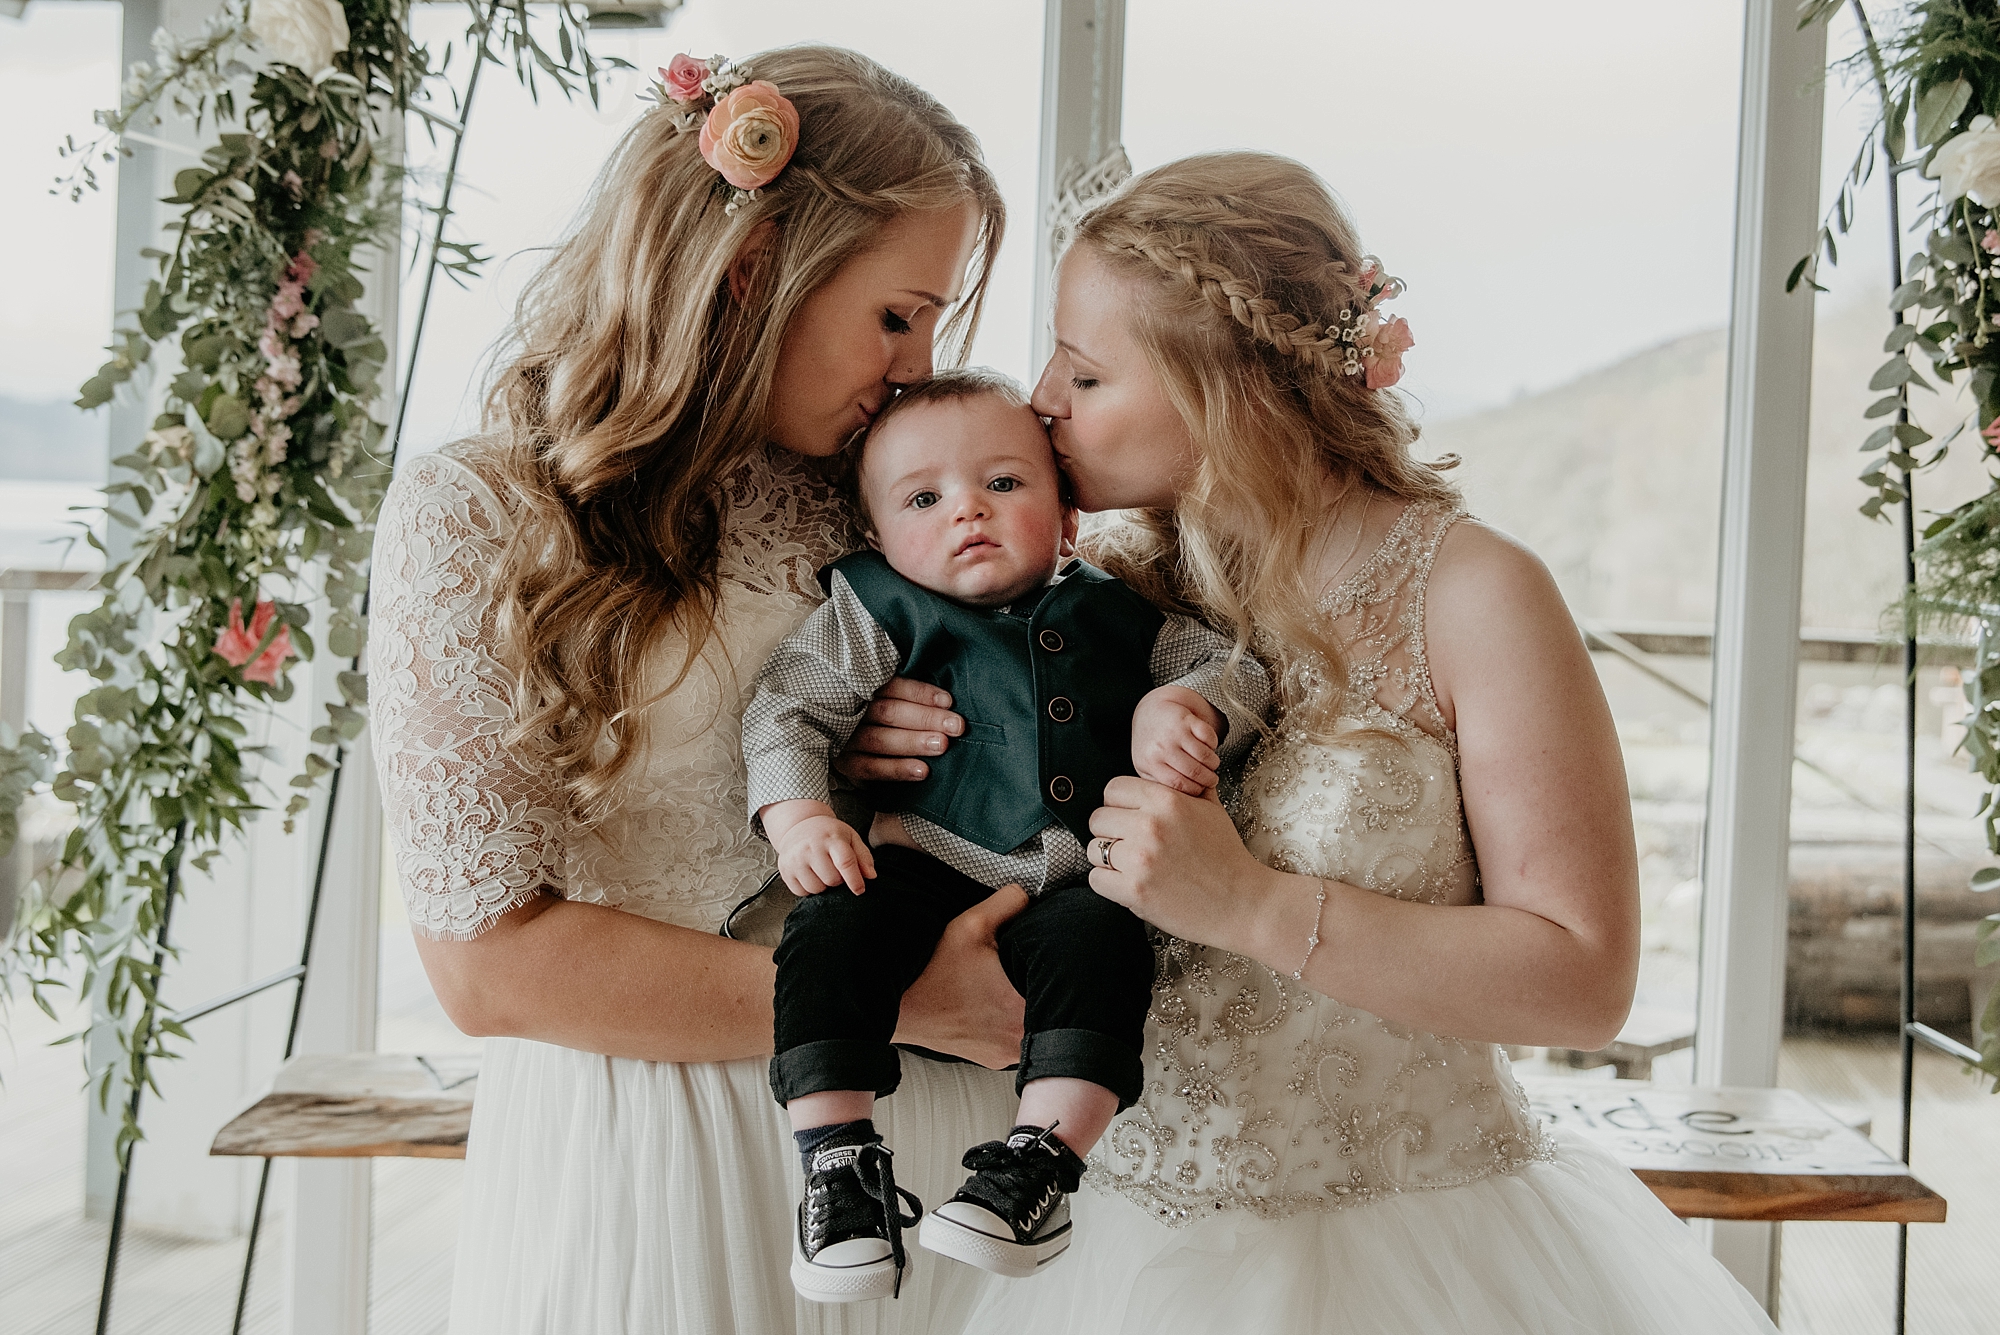 01 Baby in Converse at a lesbian wedding